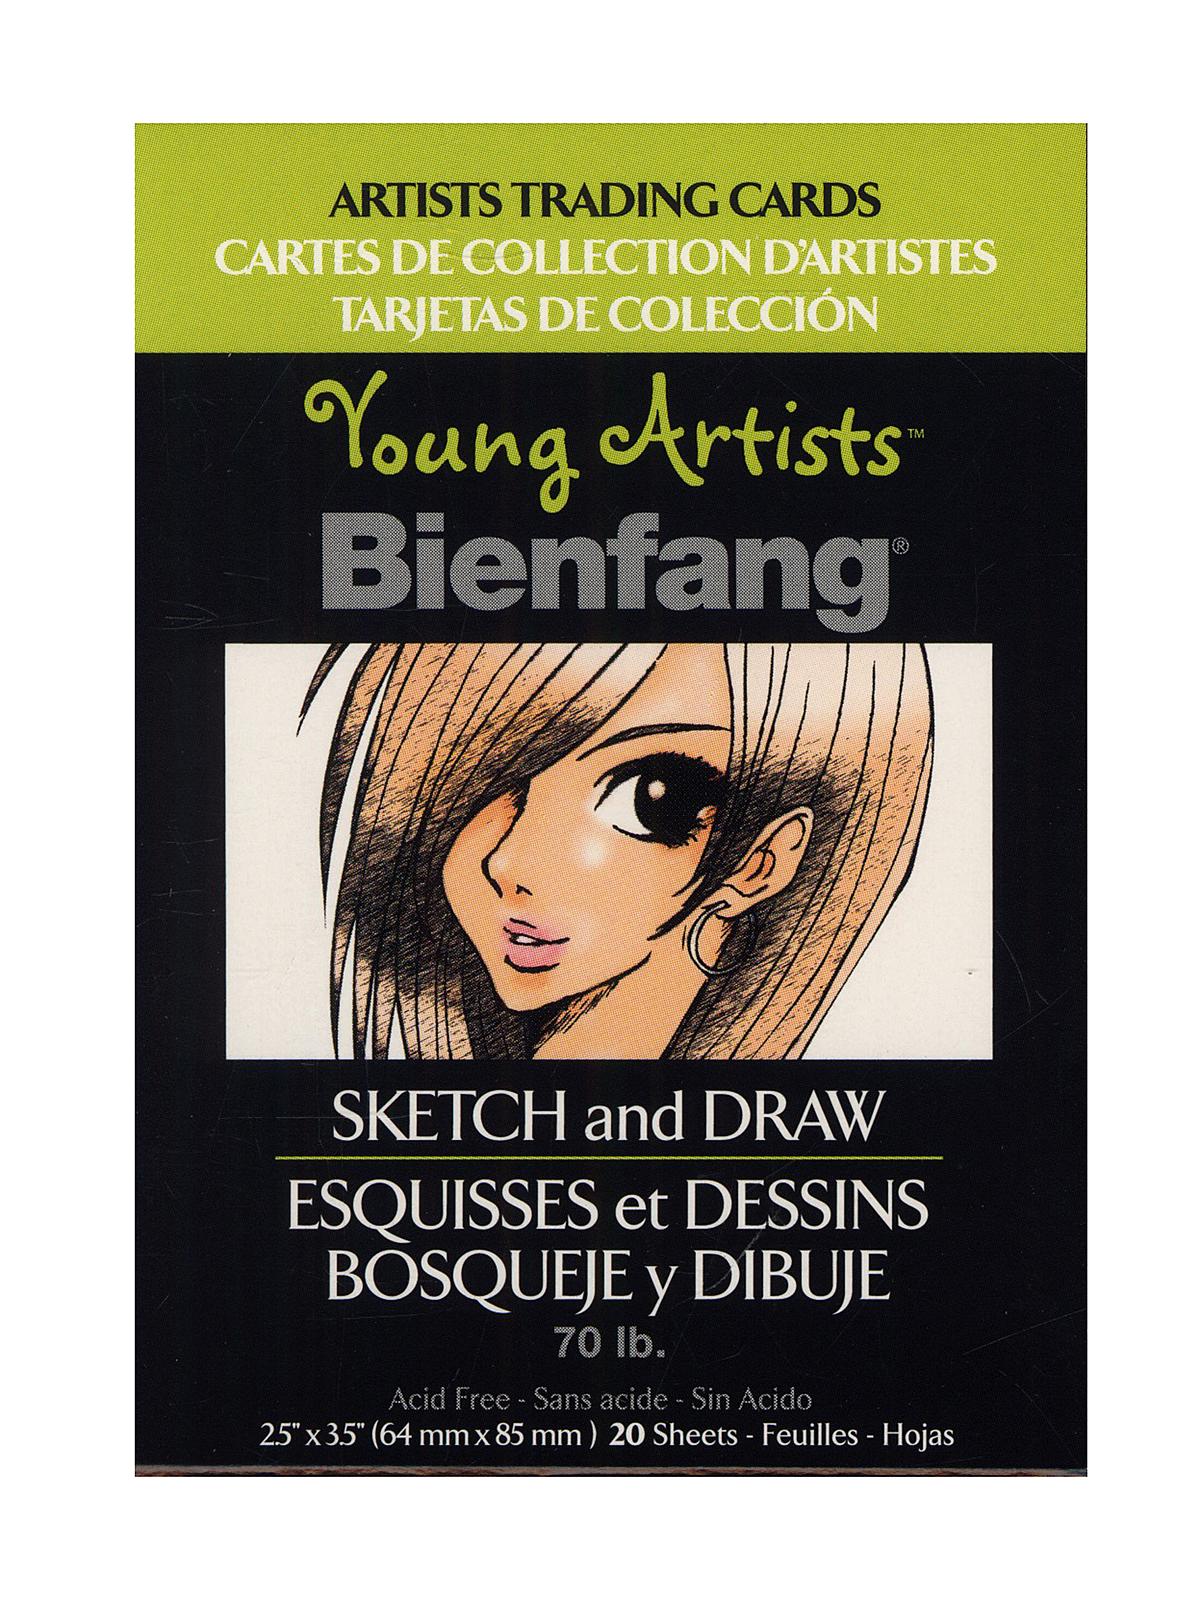 Young Artists Trading Cards Sketch Pack Of 20